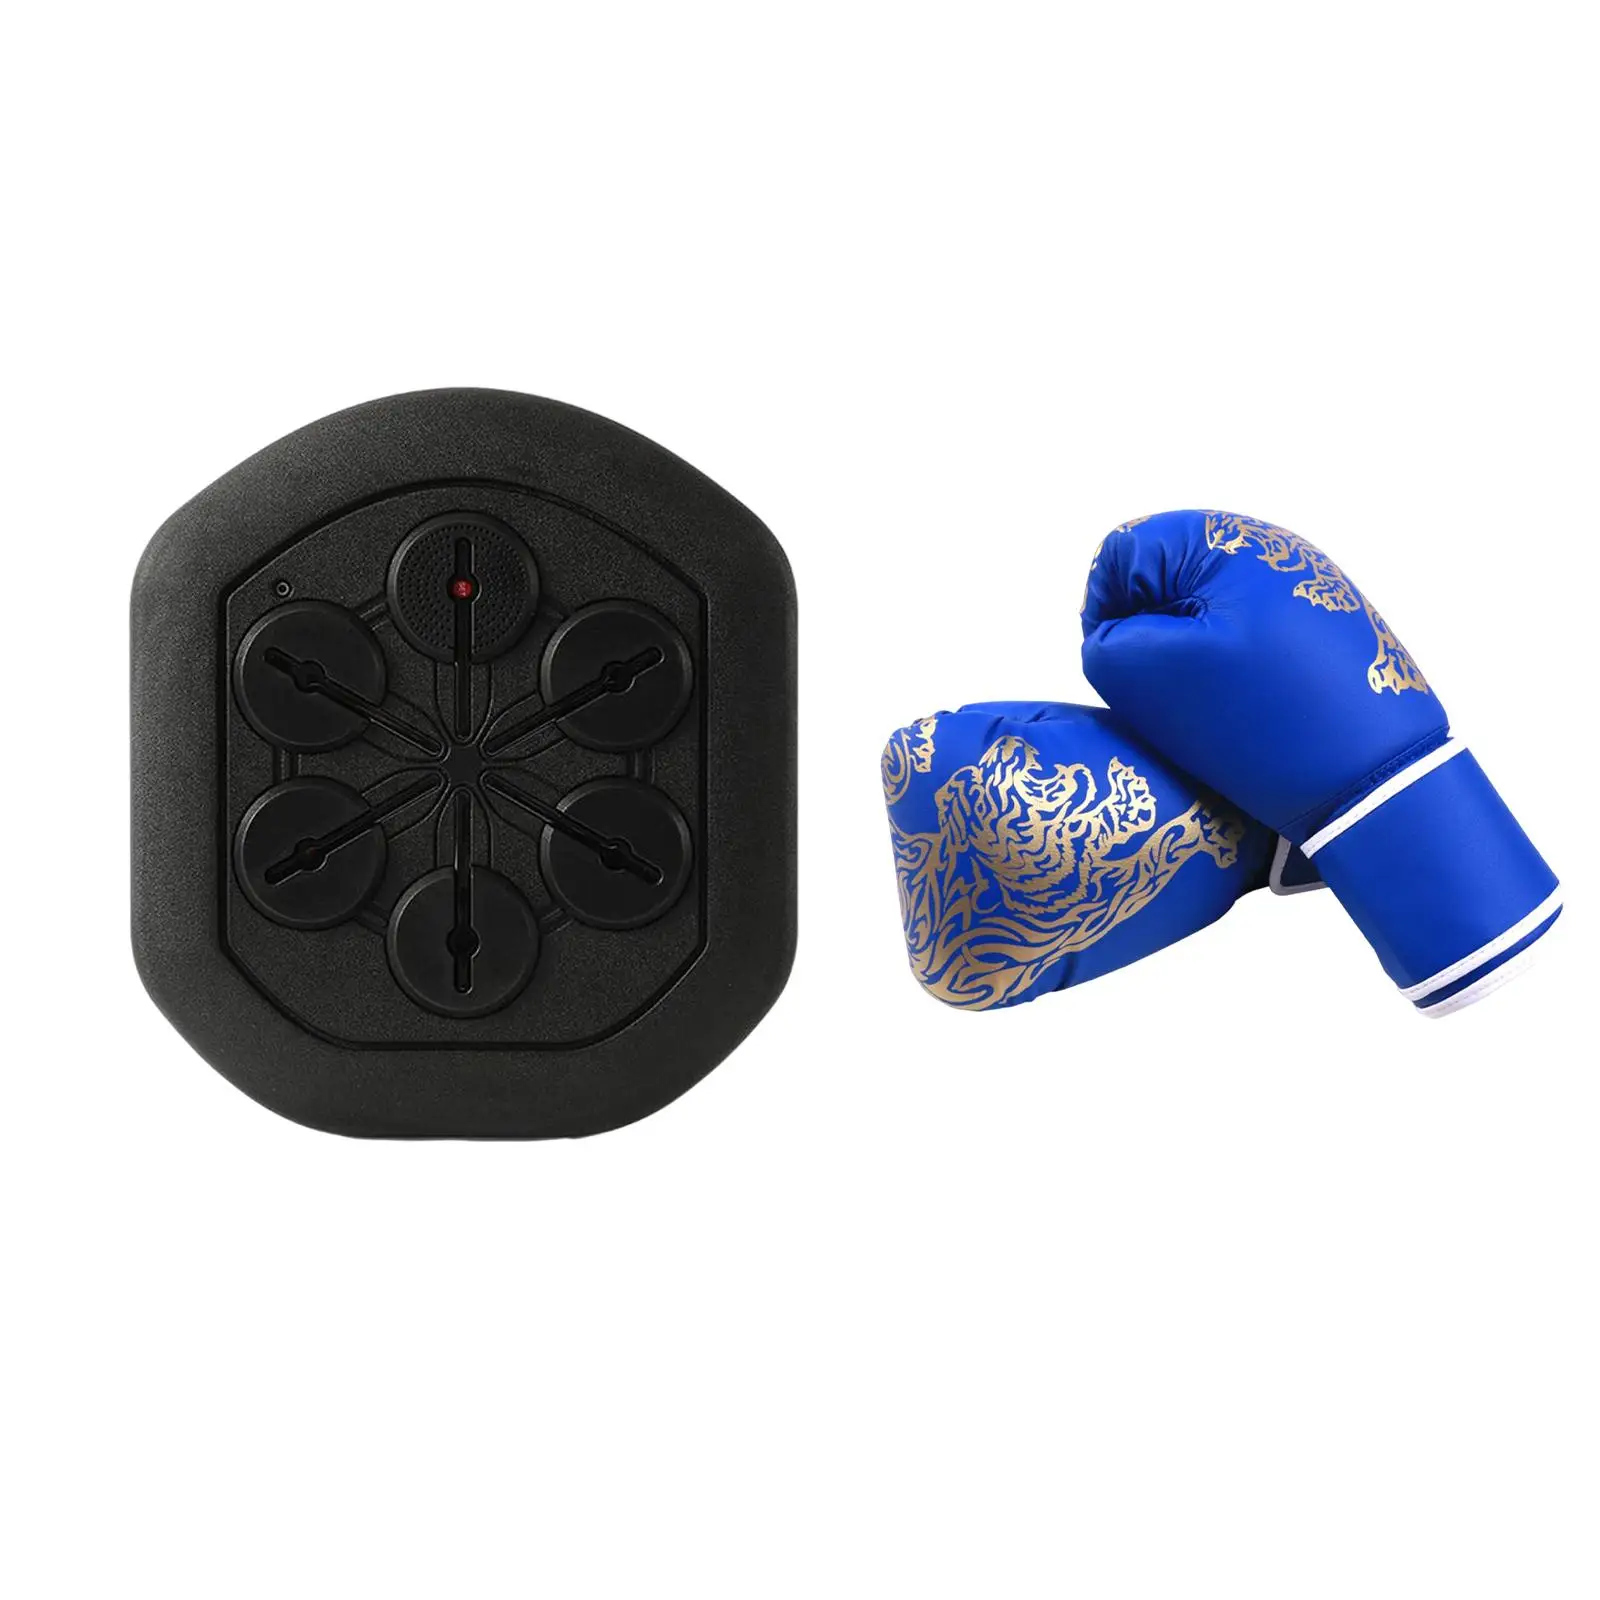 Music Boxing Wall Target Boxing Trainer Agility Training for Kids Adults